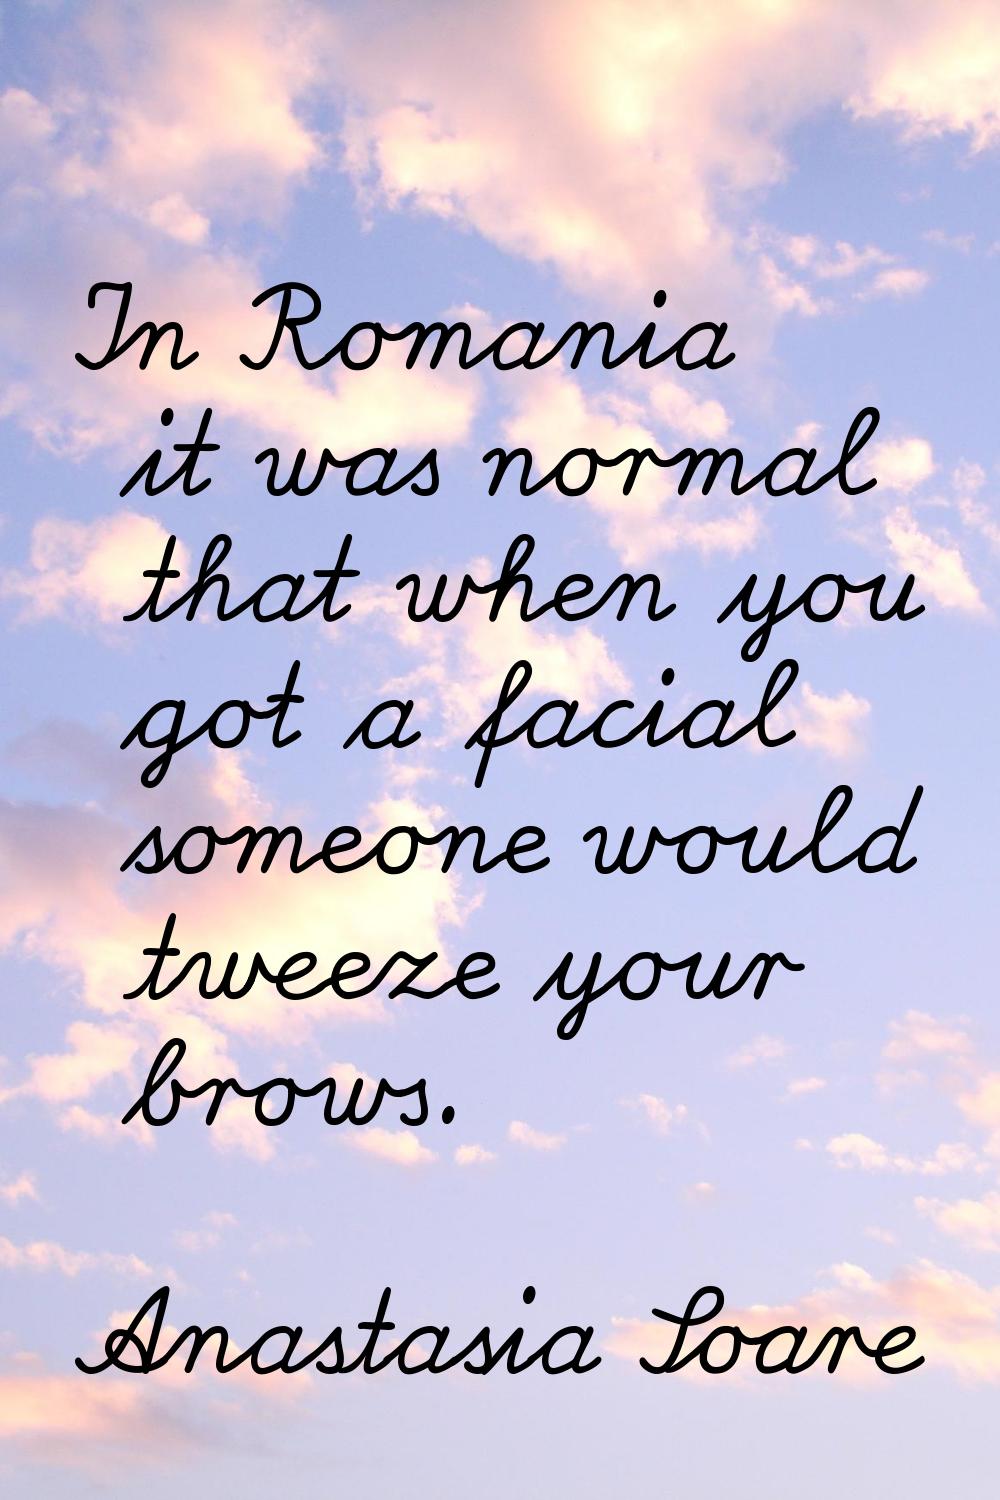 In Romania it was normal that when you got a facial someone would tweeze your brows.